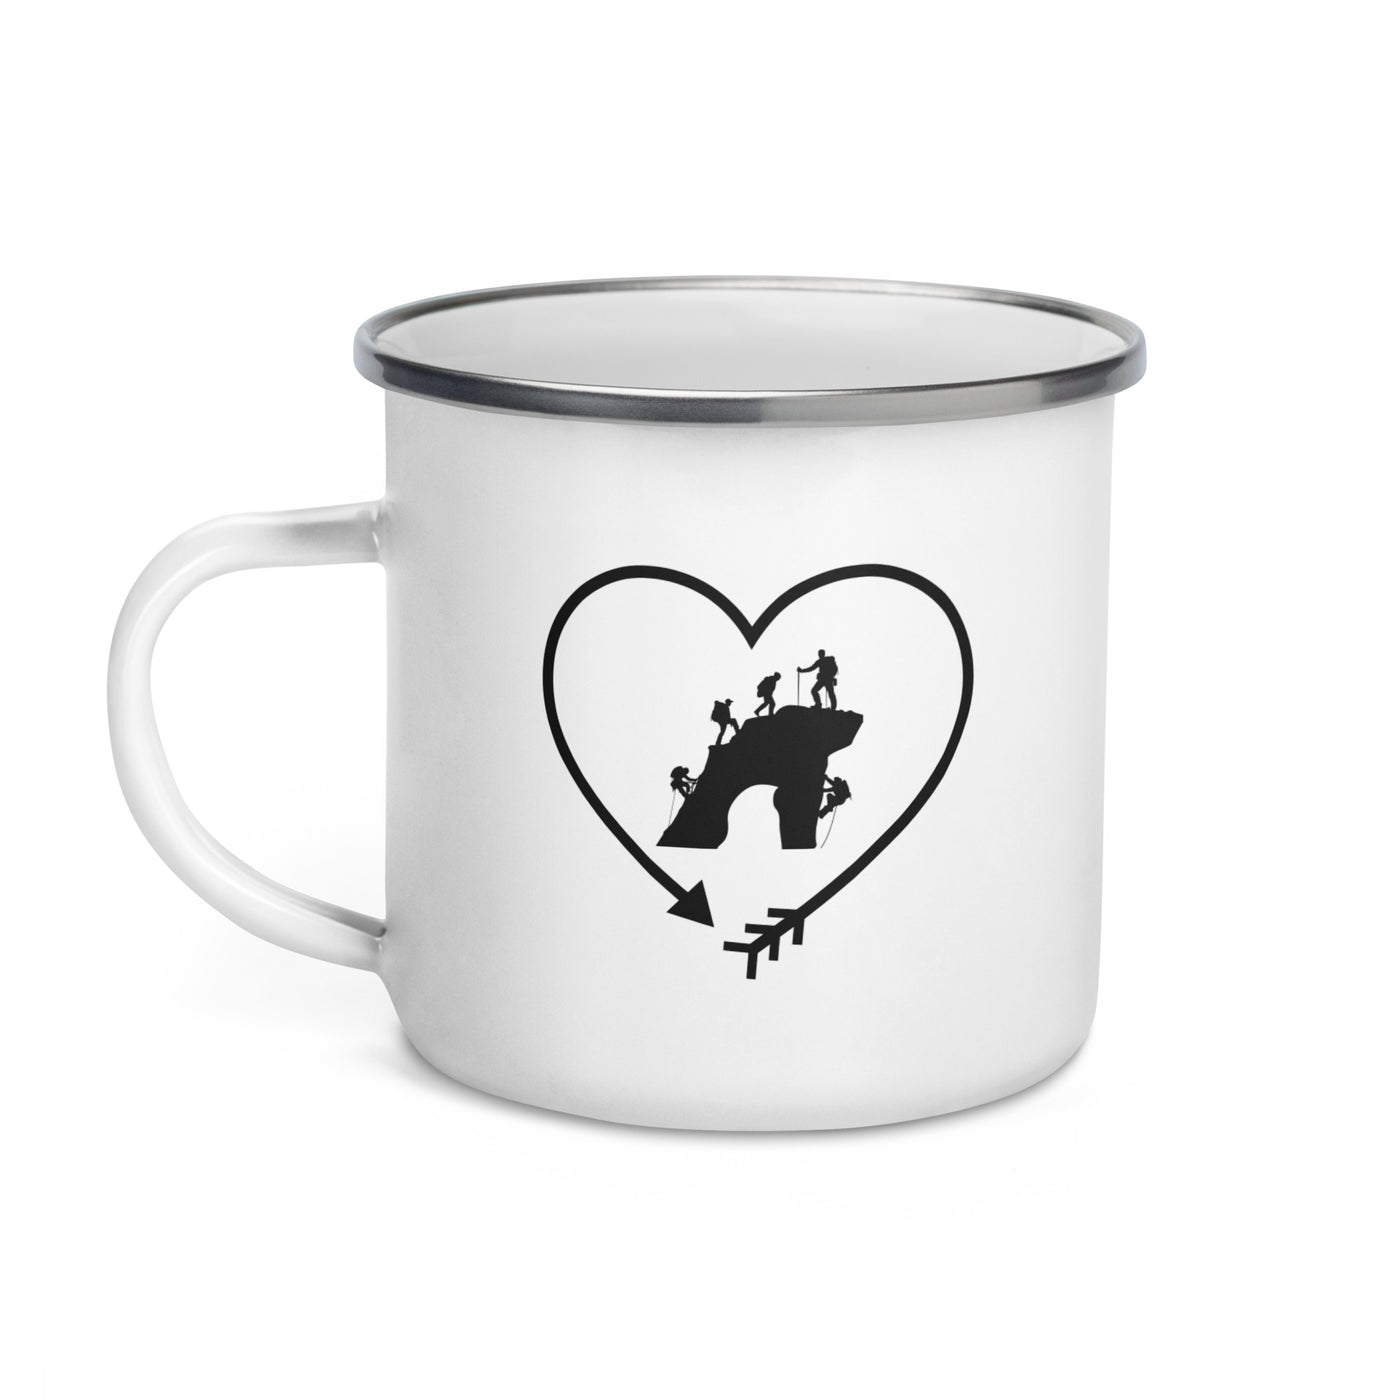 Arrow In Heartshape And Climbing - Emaille Tasse klettern